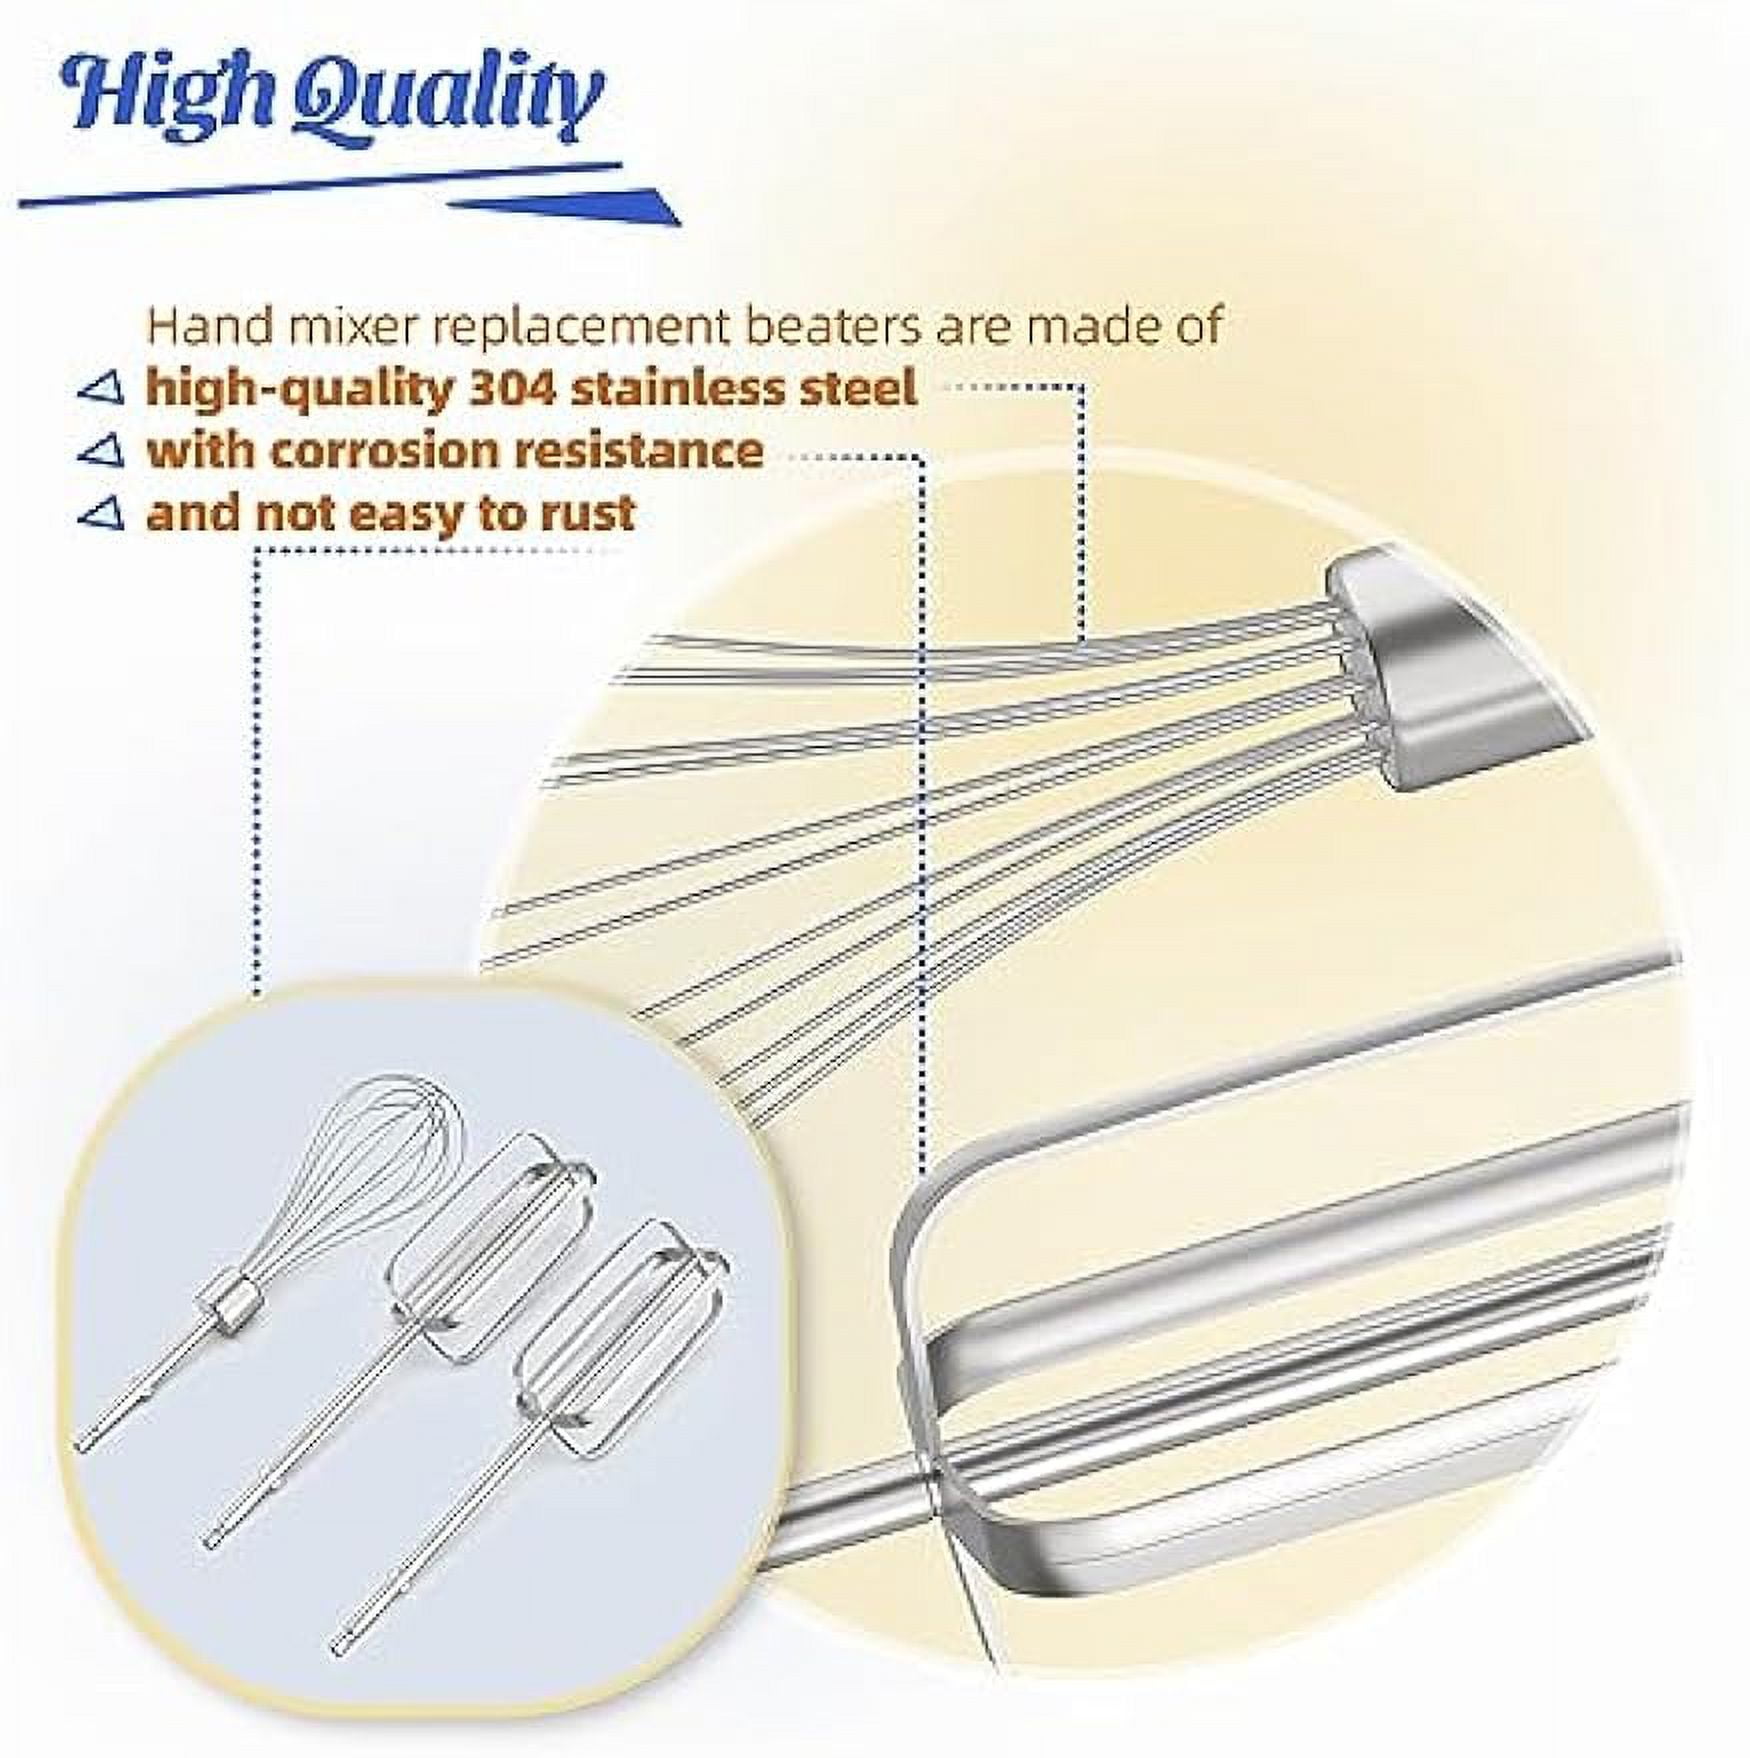 Hand Mixer Replacement Beaters For Chm Series Hand Mixer Parts, Hm